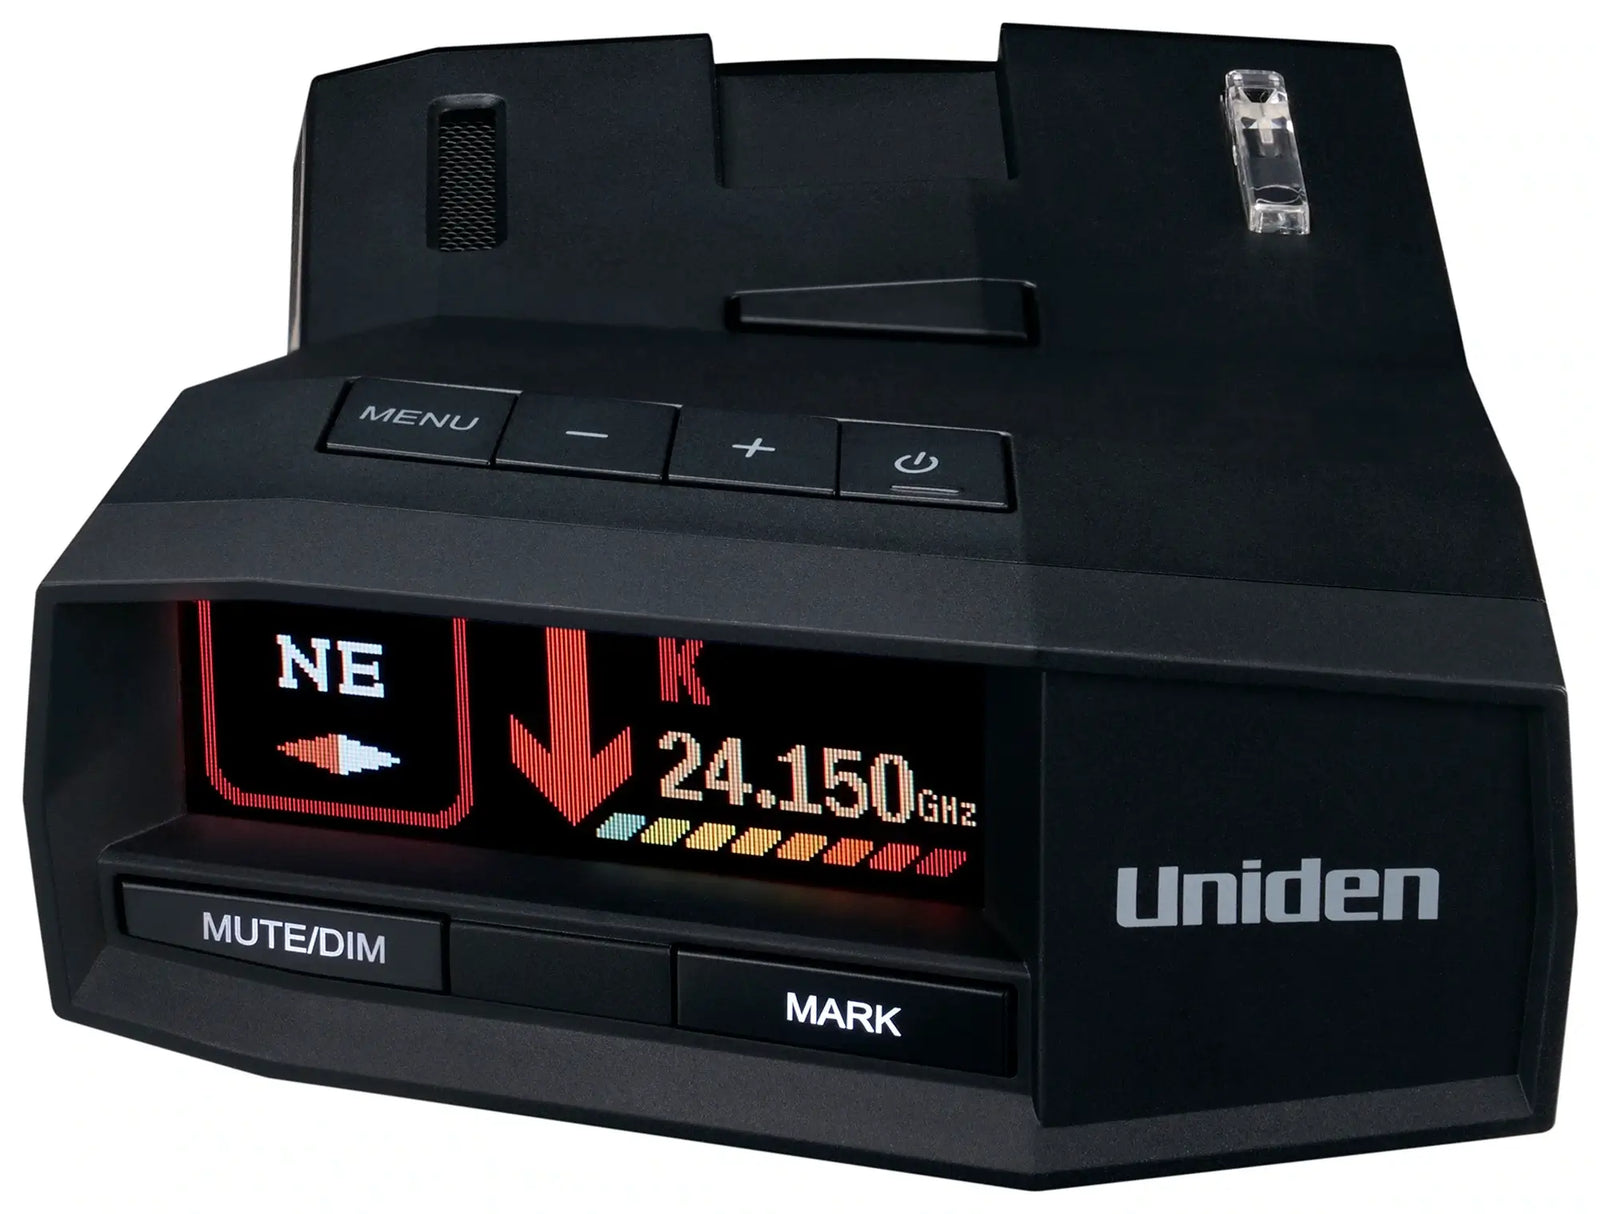 UNIDEN R8NZ Extreme Long Range Radar/Laser Detector with arrows and GPS